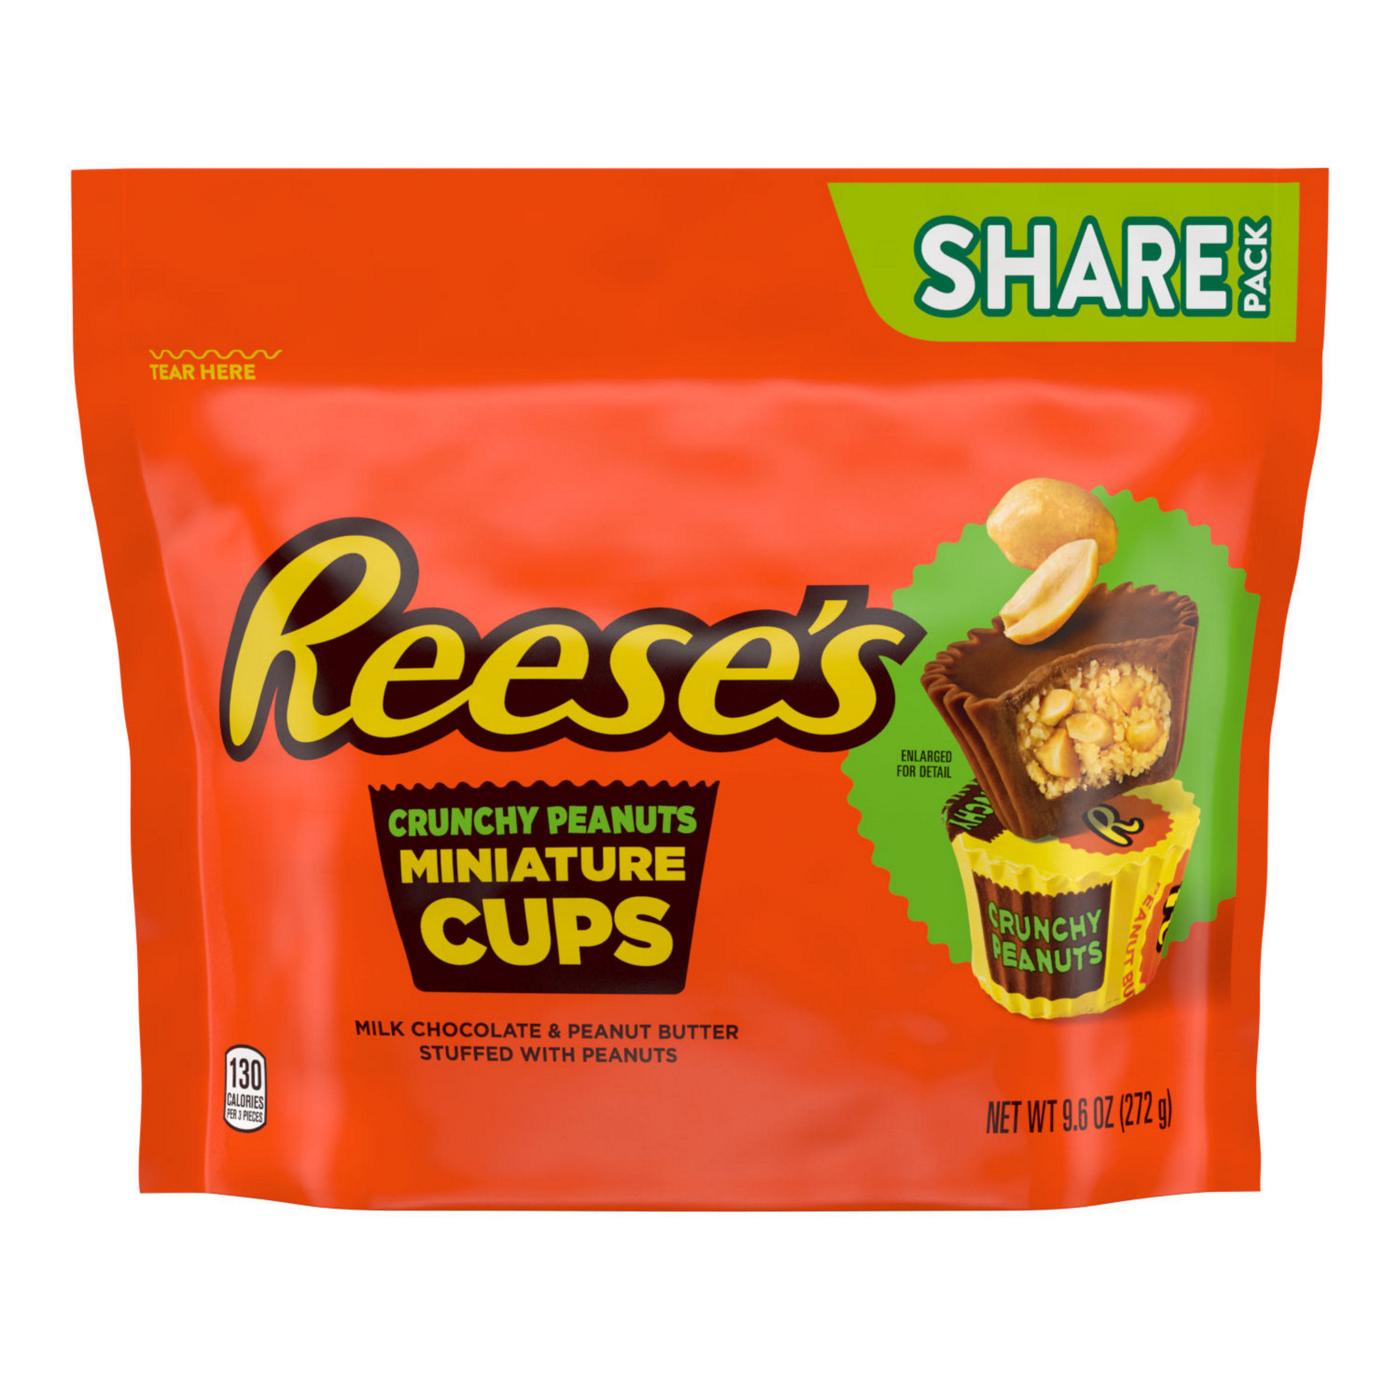 Reese's Milk Chocolate Peanut Butter Cups Candy - Share Pack; image 1 of 4